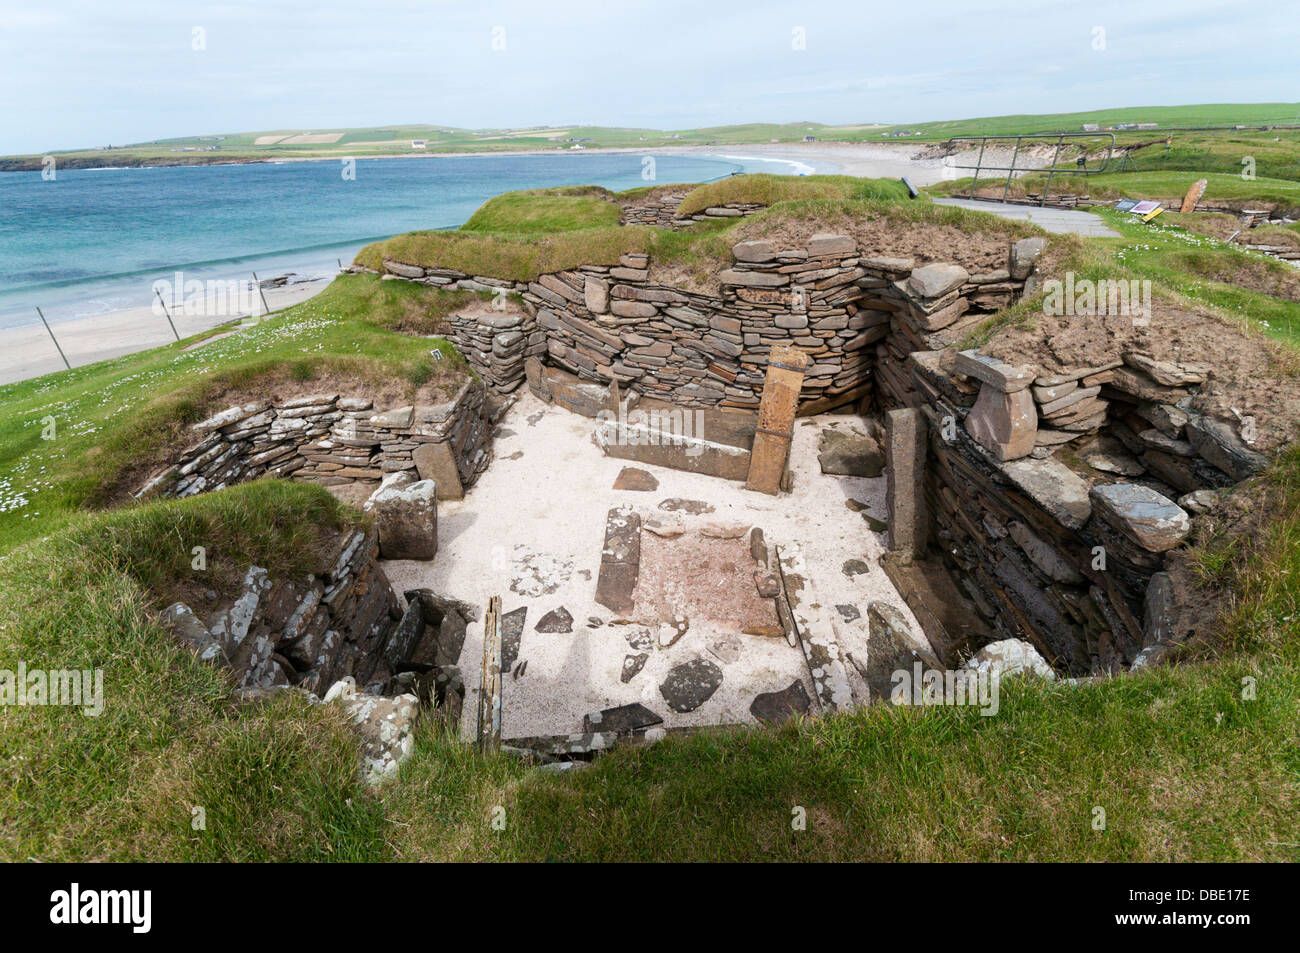 House 1 at Skara Brae Neolithic Village on Mainland Orkney with the Bay of Skaill in the background. Stock Photo